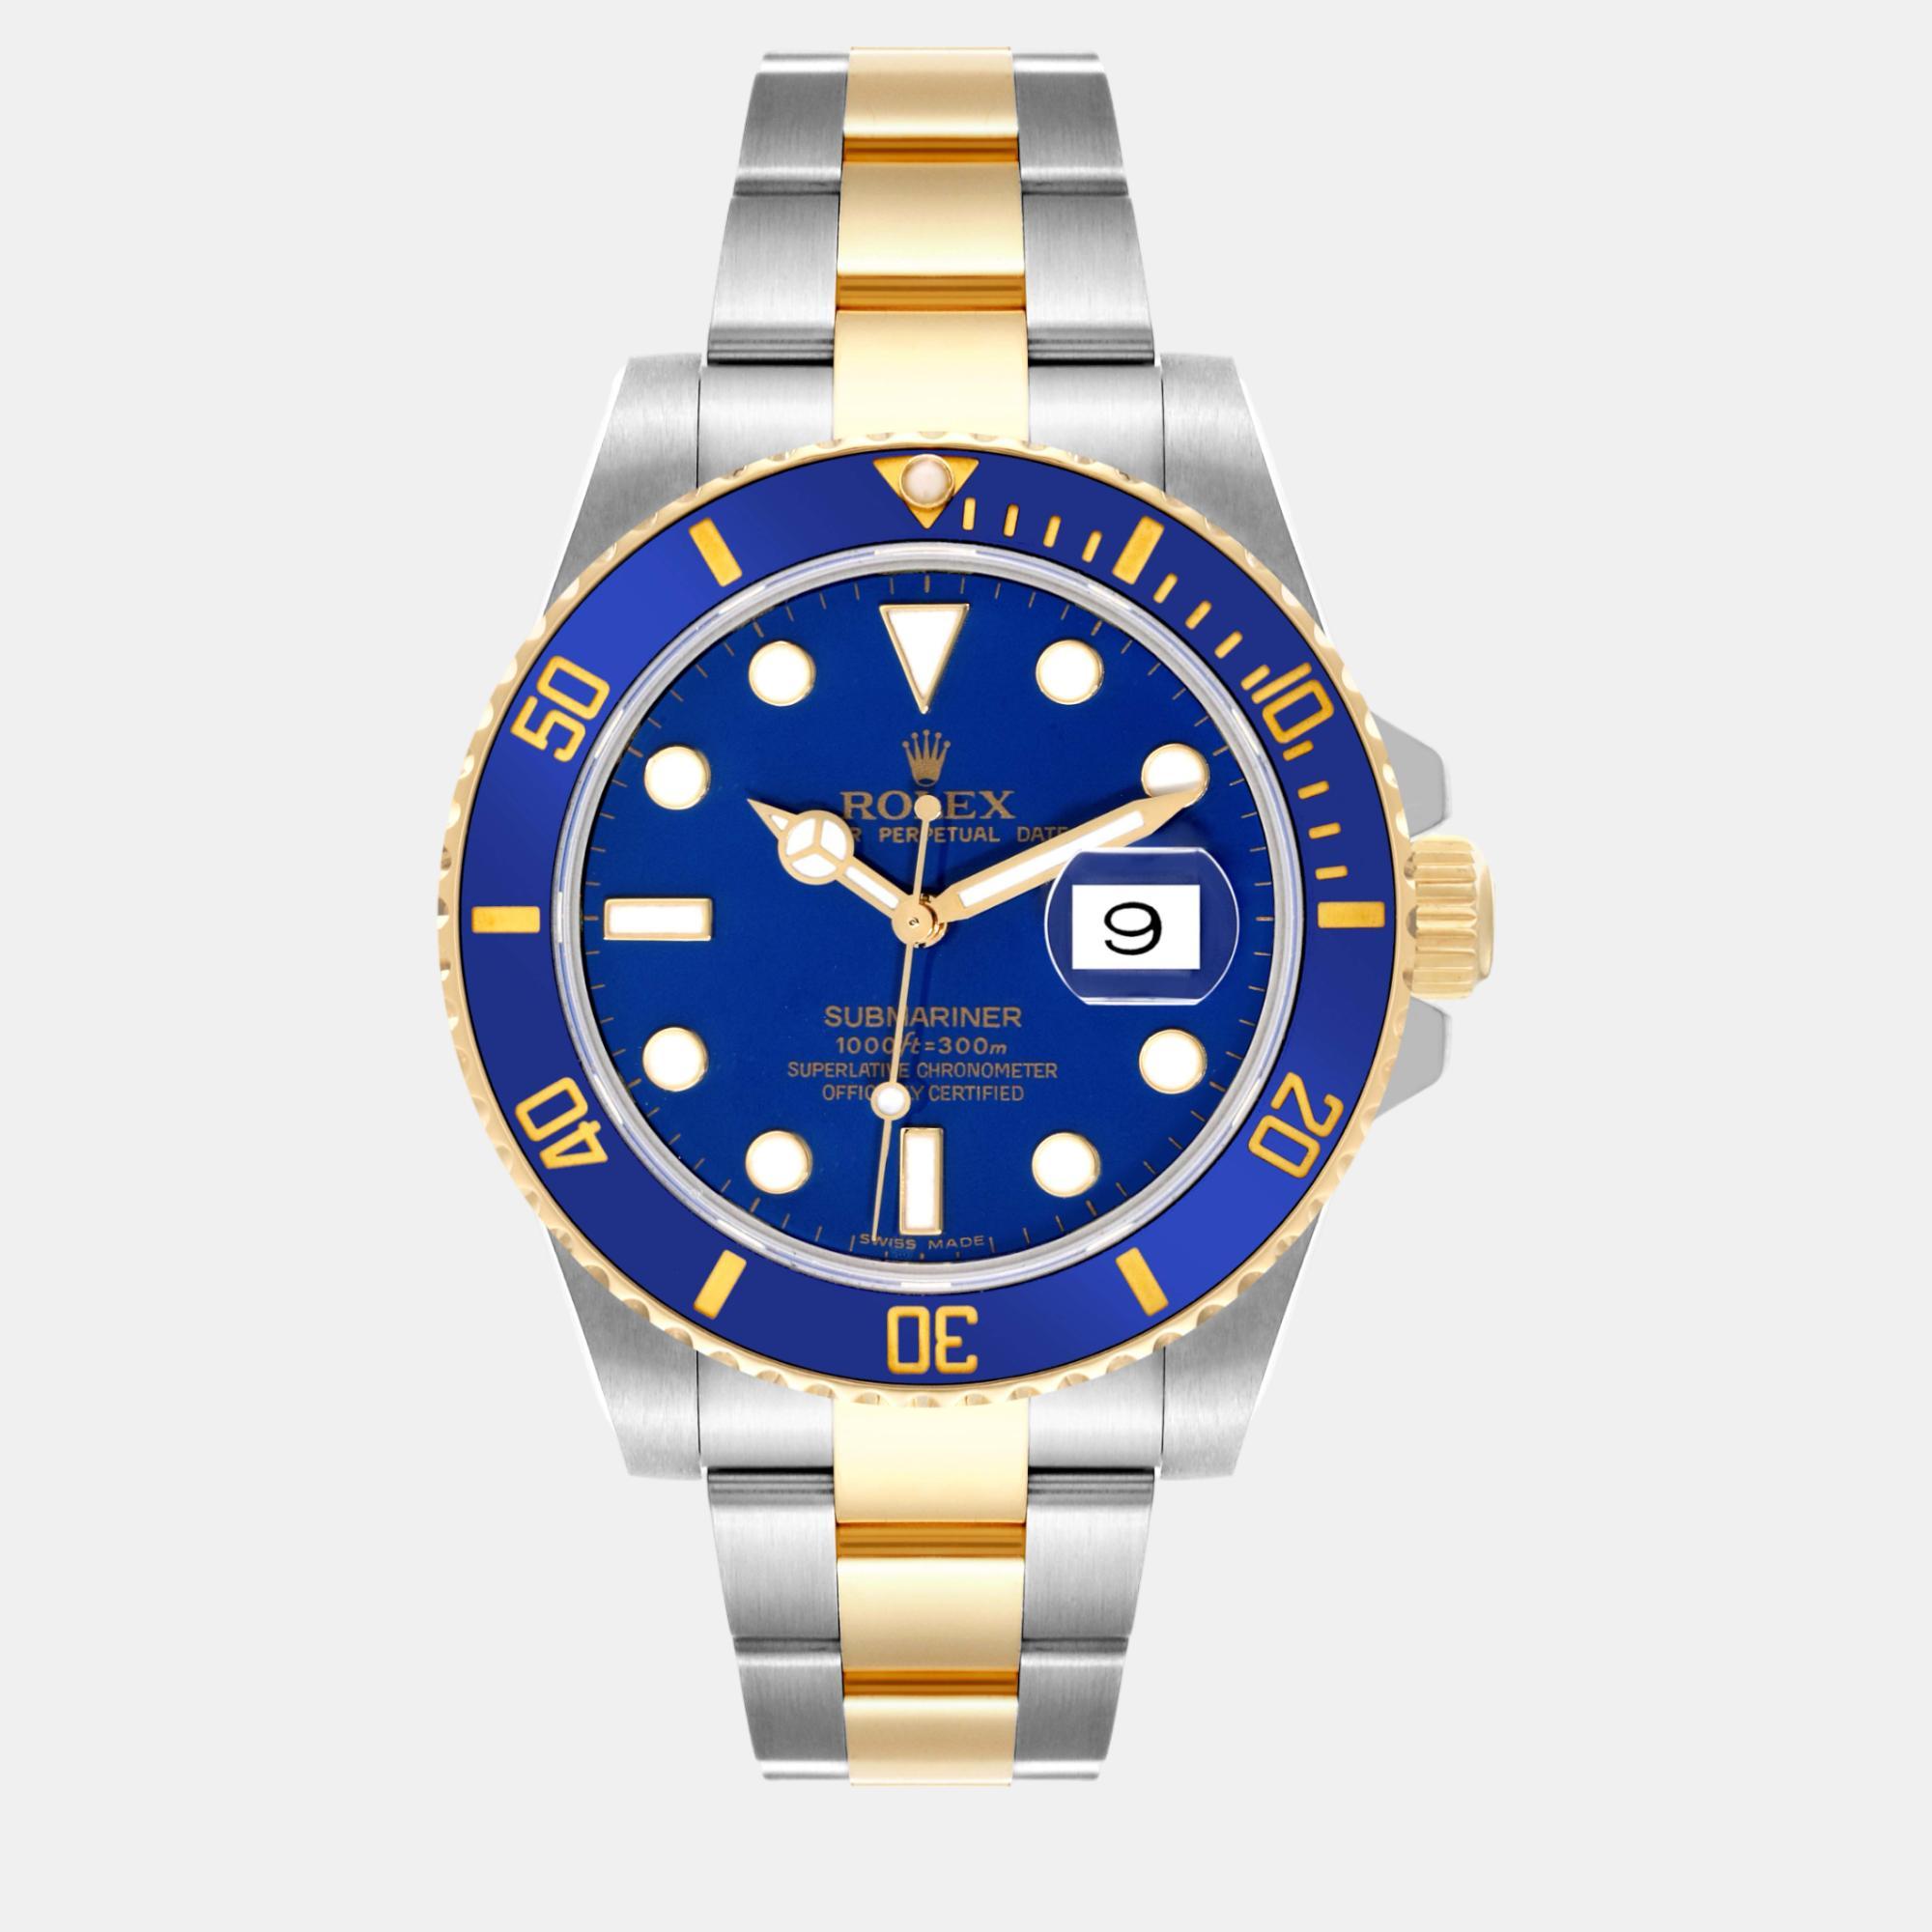 Rolex submariner steel yellow gold blue dial mens watch 116613 36 mm